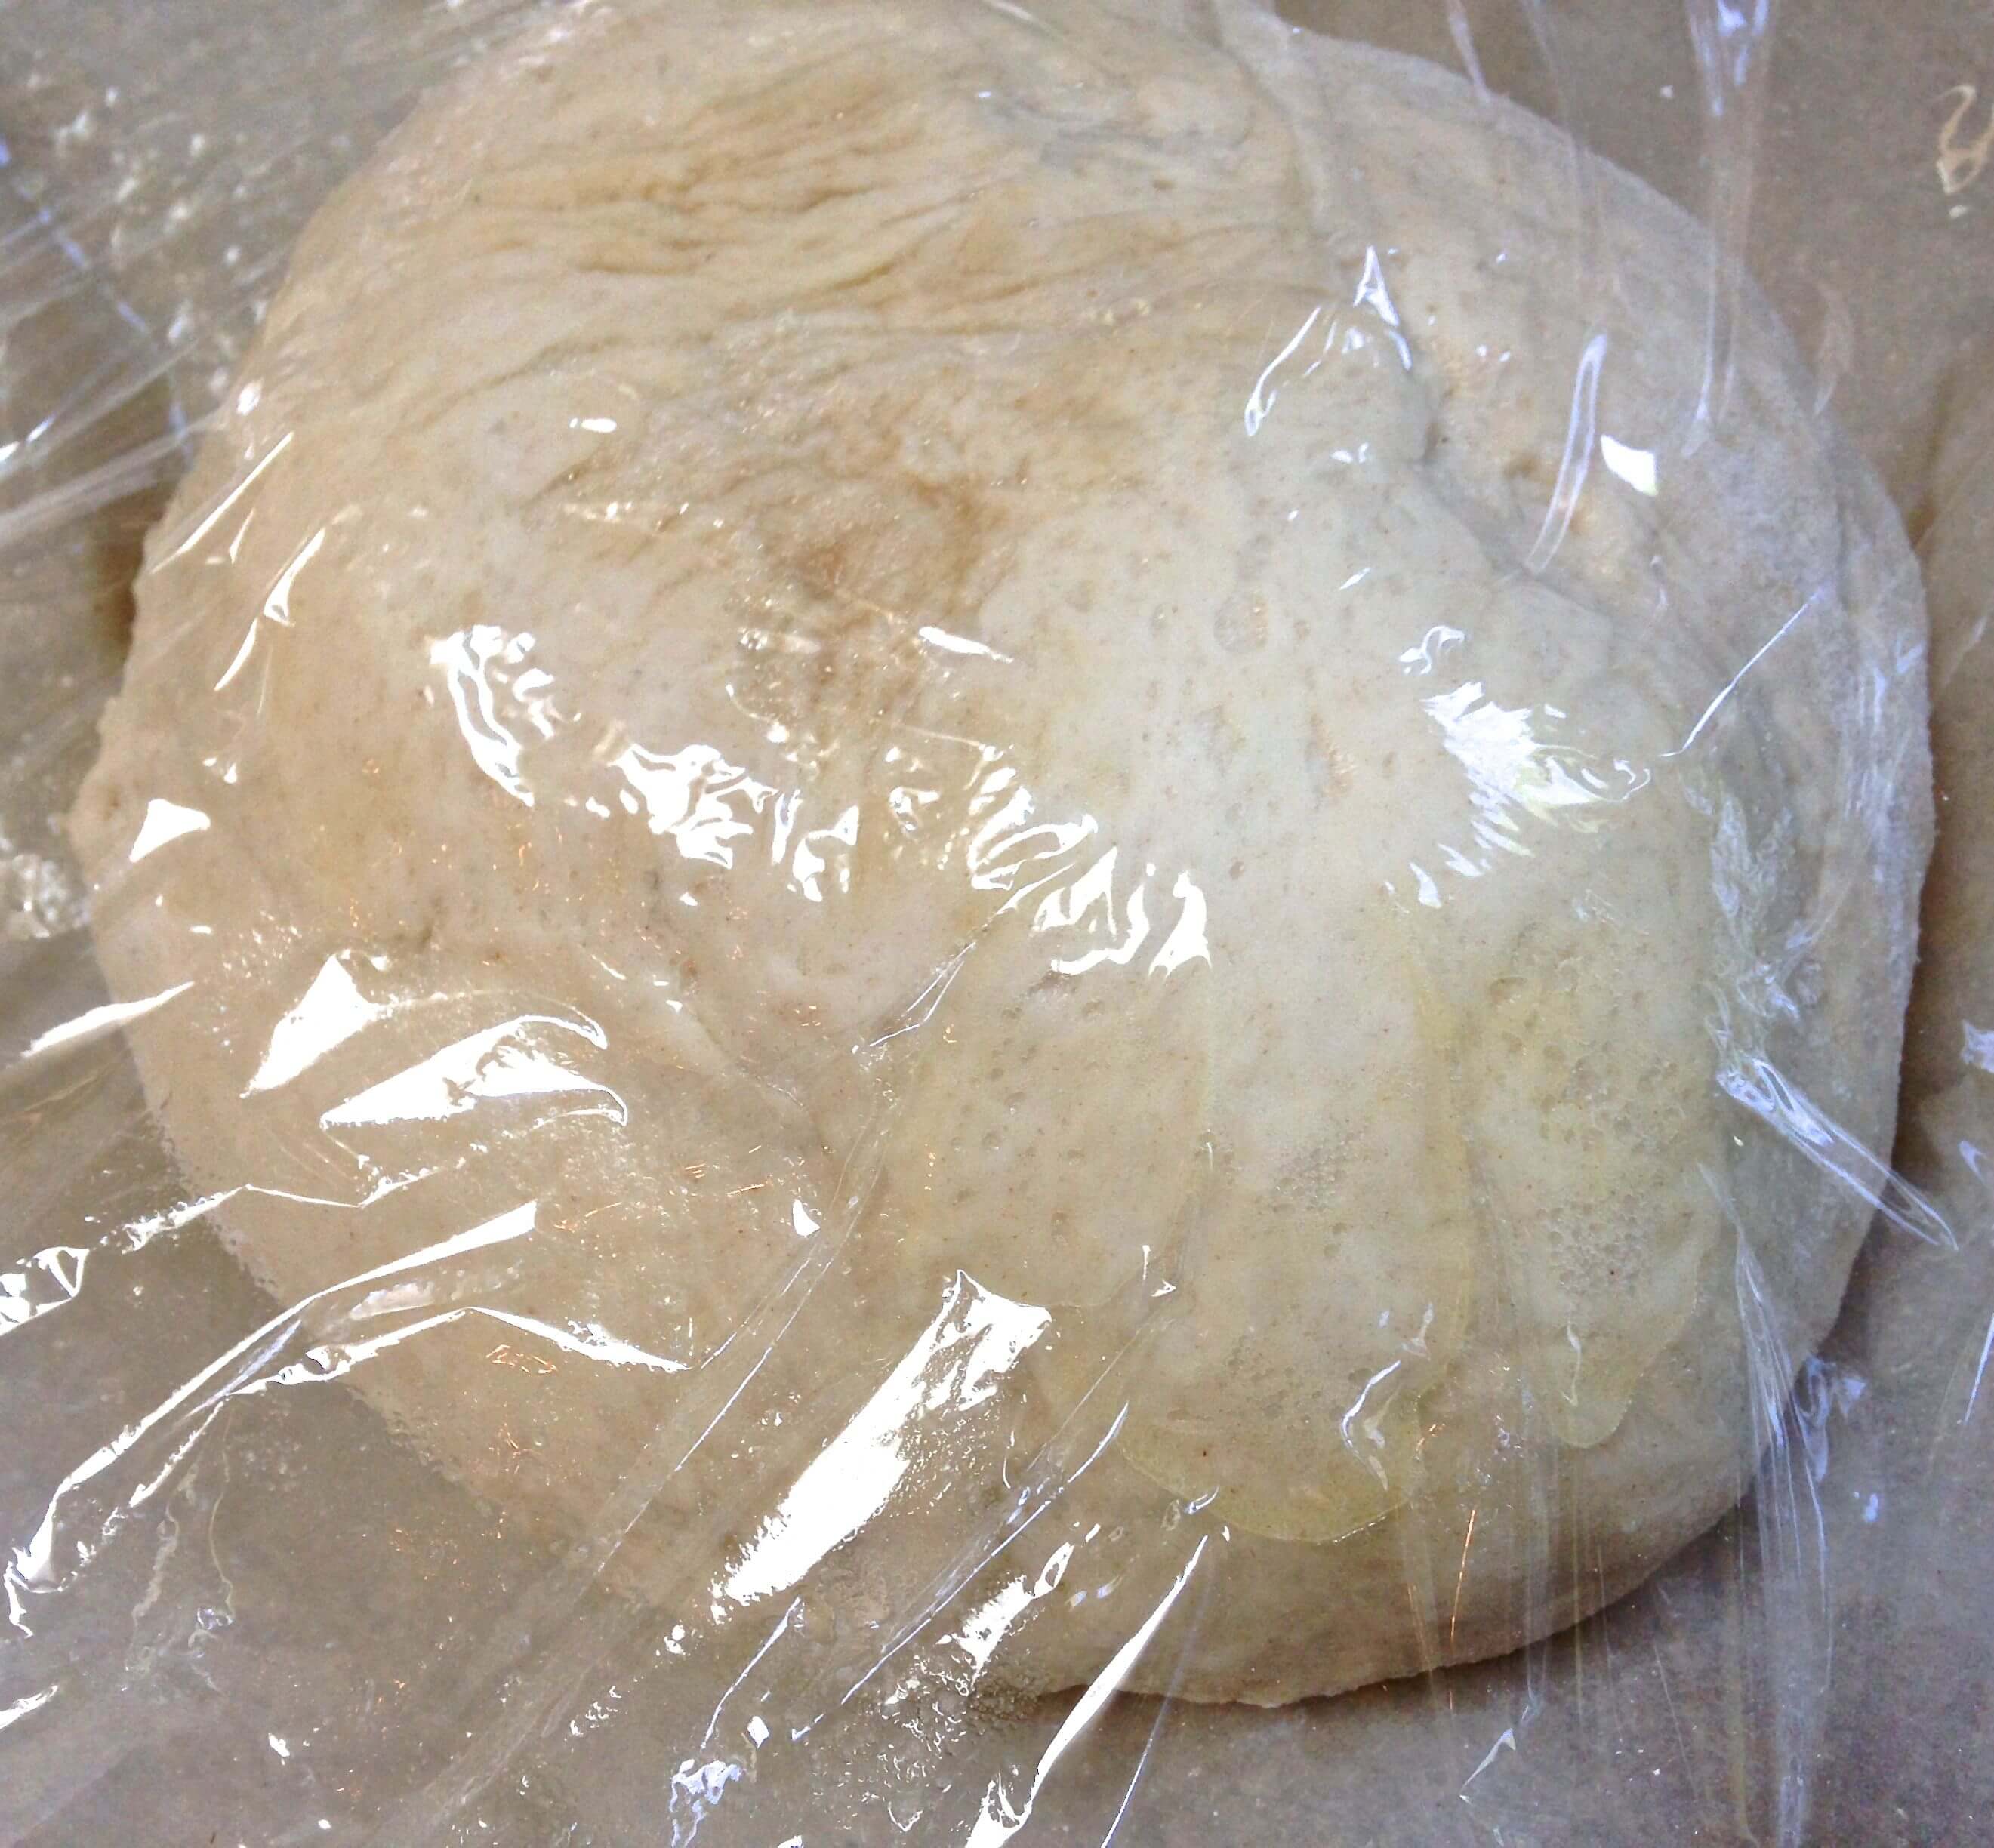 A ball of raw bread dough sitting in a glass bowl covered with plastic wrap.